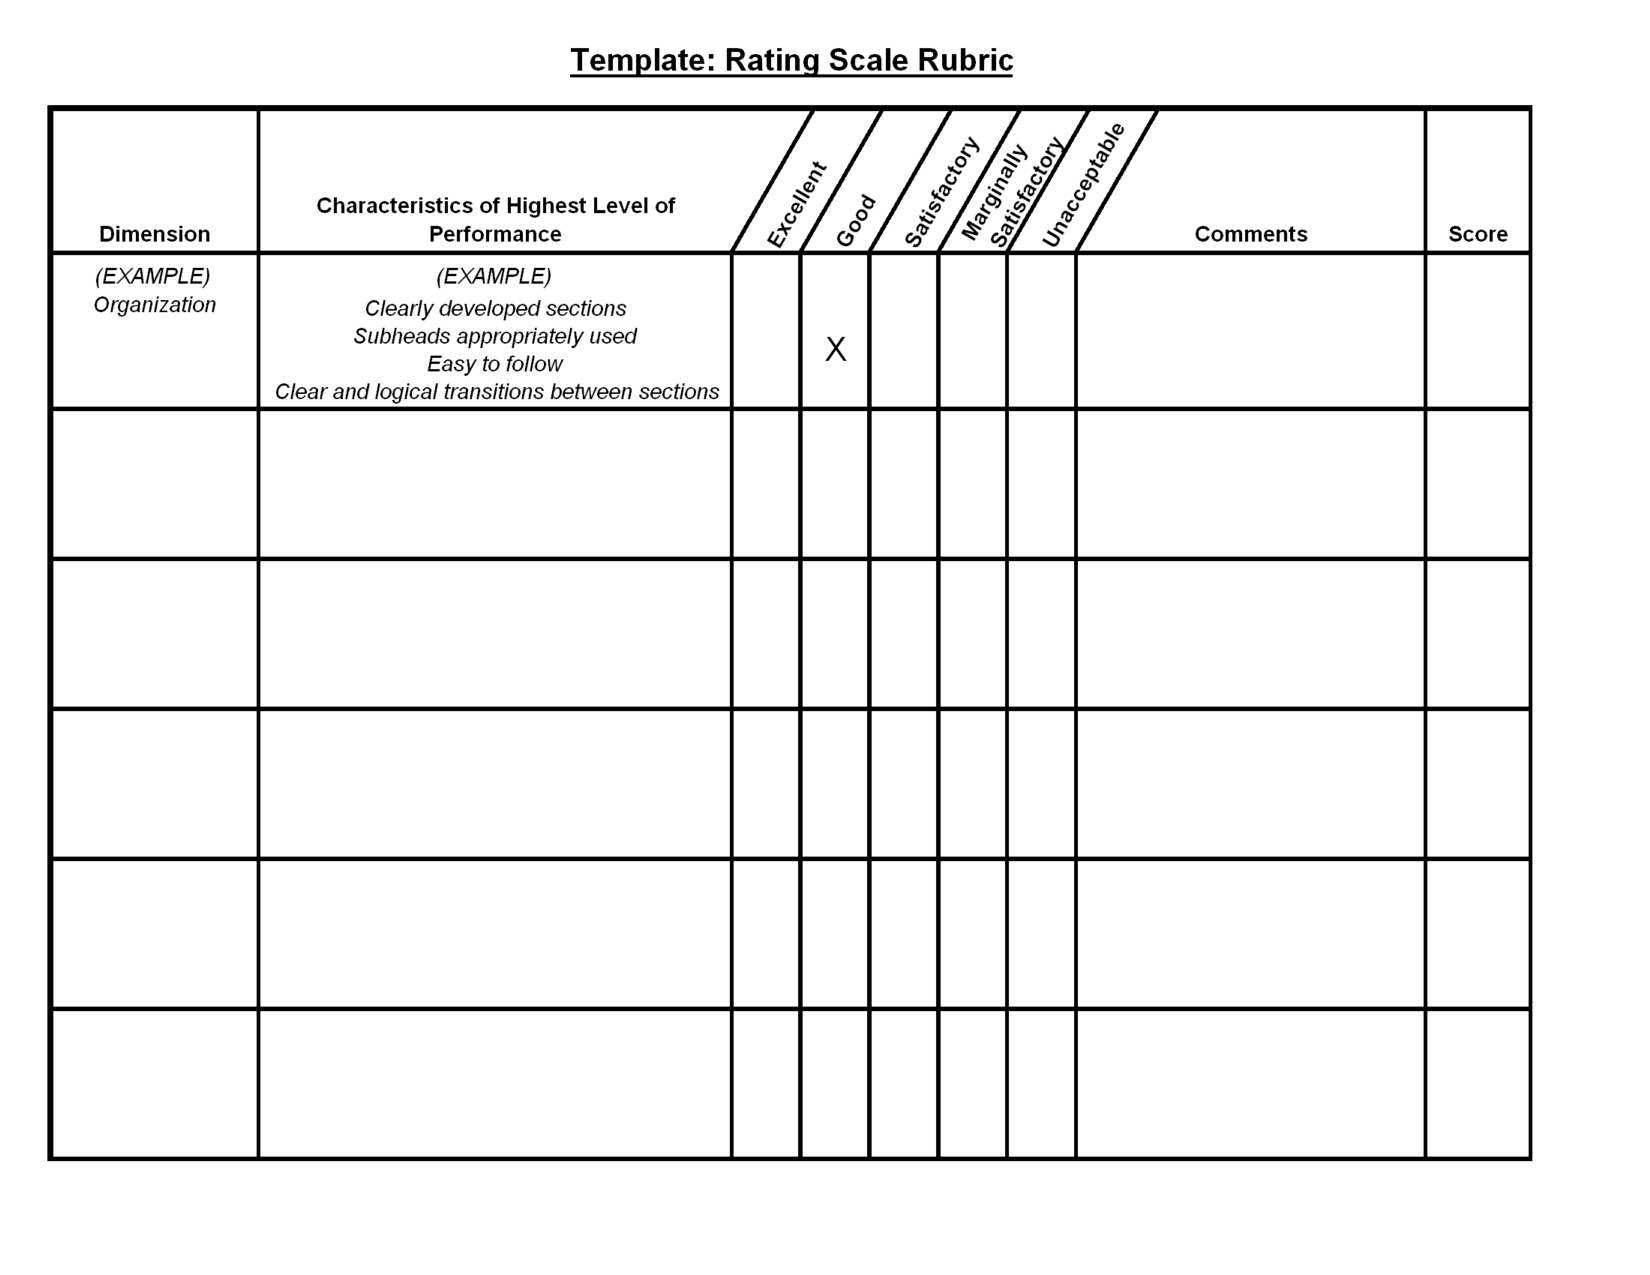 Rubric Templates | Template Rating Scale Rubric | Rubrics With Blank Rubric Template